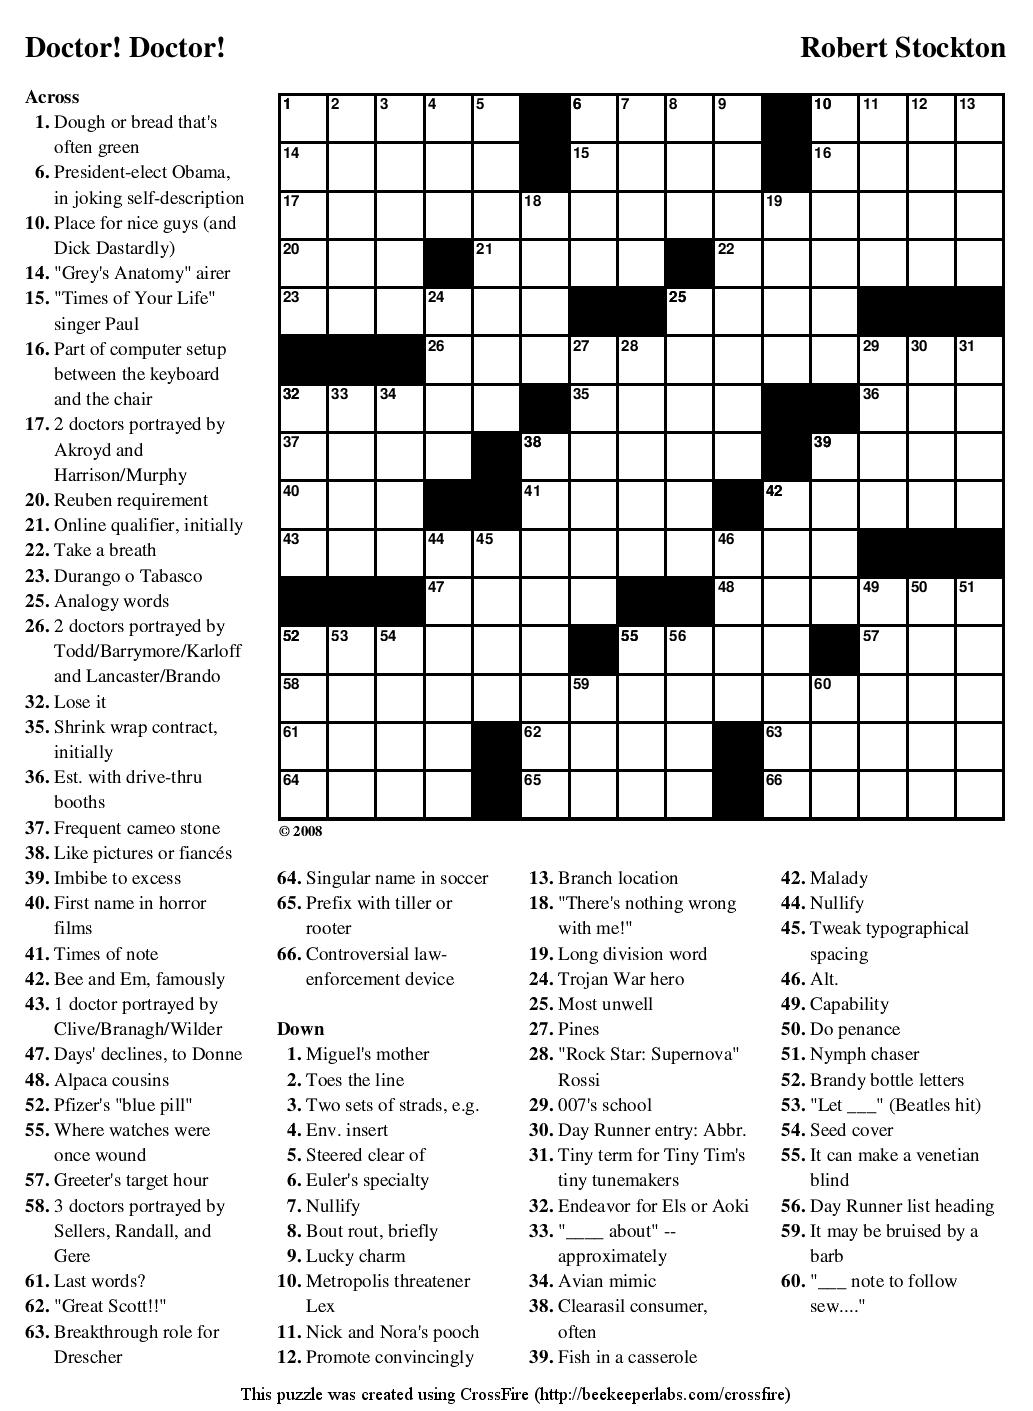 Crossword Puzzles Printable - Yahoo Image Search Results | Crossword - 15 X 15 Printable Crosswords